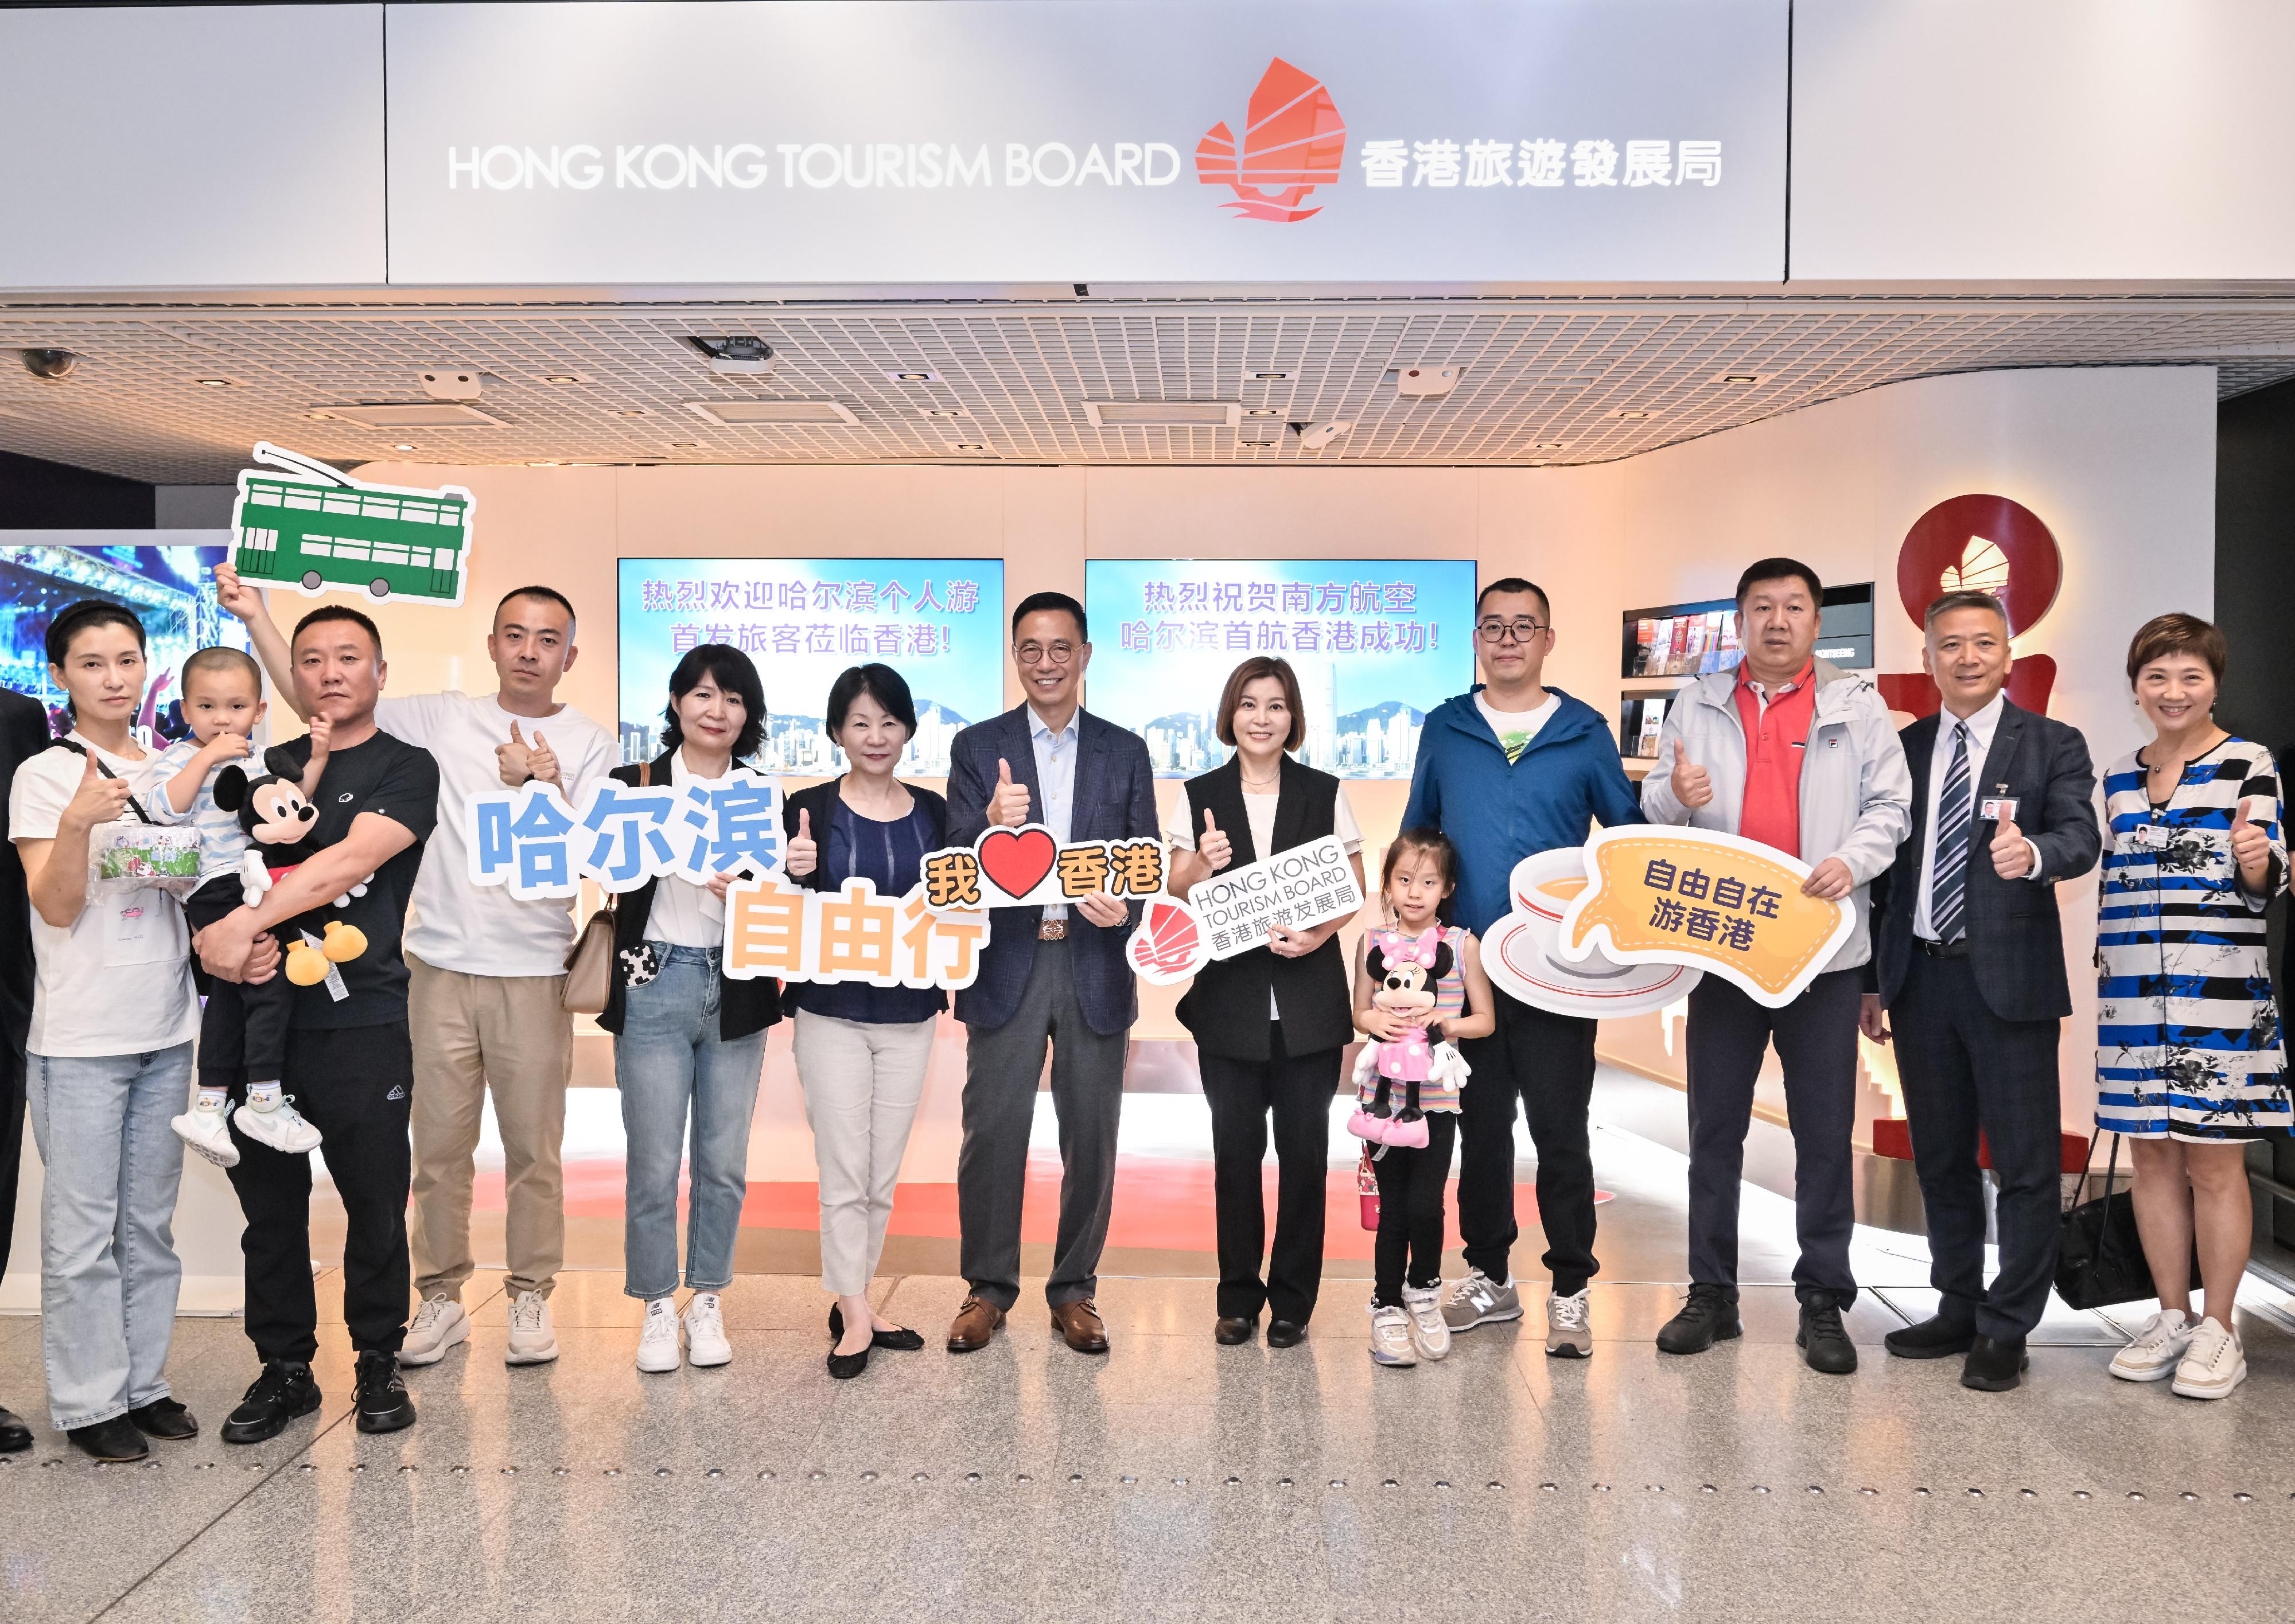 The Secretary for Culture, Sports and Tourism, Mr Kevin Yeung (centre), today (June 2) welcomed representatives of tourism industry and media from eight Mainland cities at the visitor centre of the Hong Kong Tourism Board located at Hong Kong International Airport. The Commissioner for Tourism, Ms Vivian Sum (sixth left), also joined the visit.